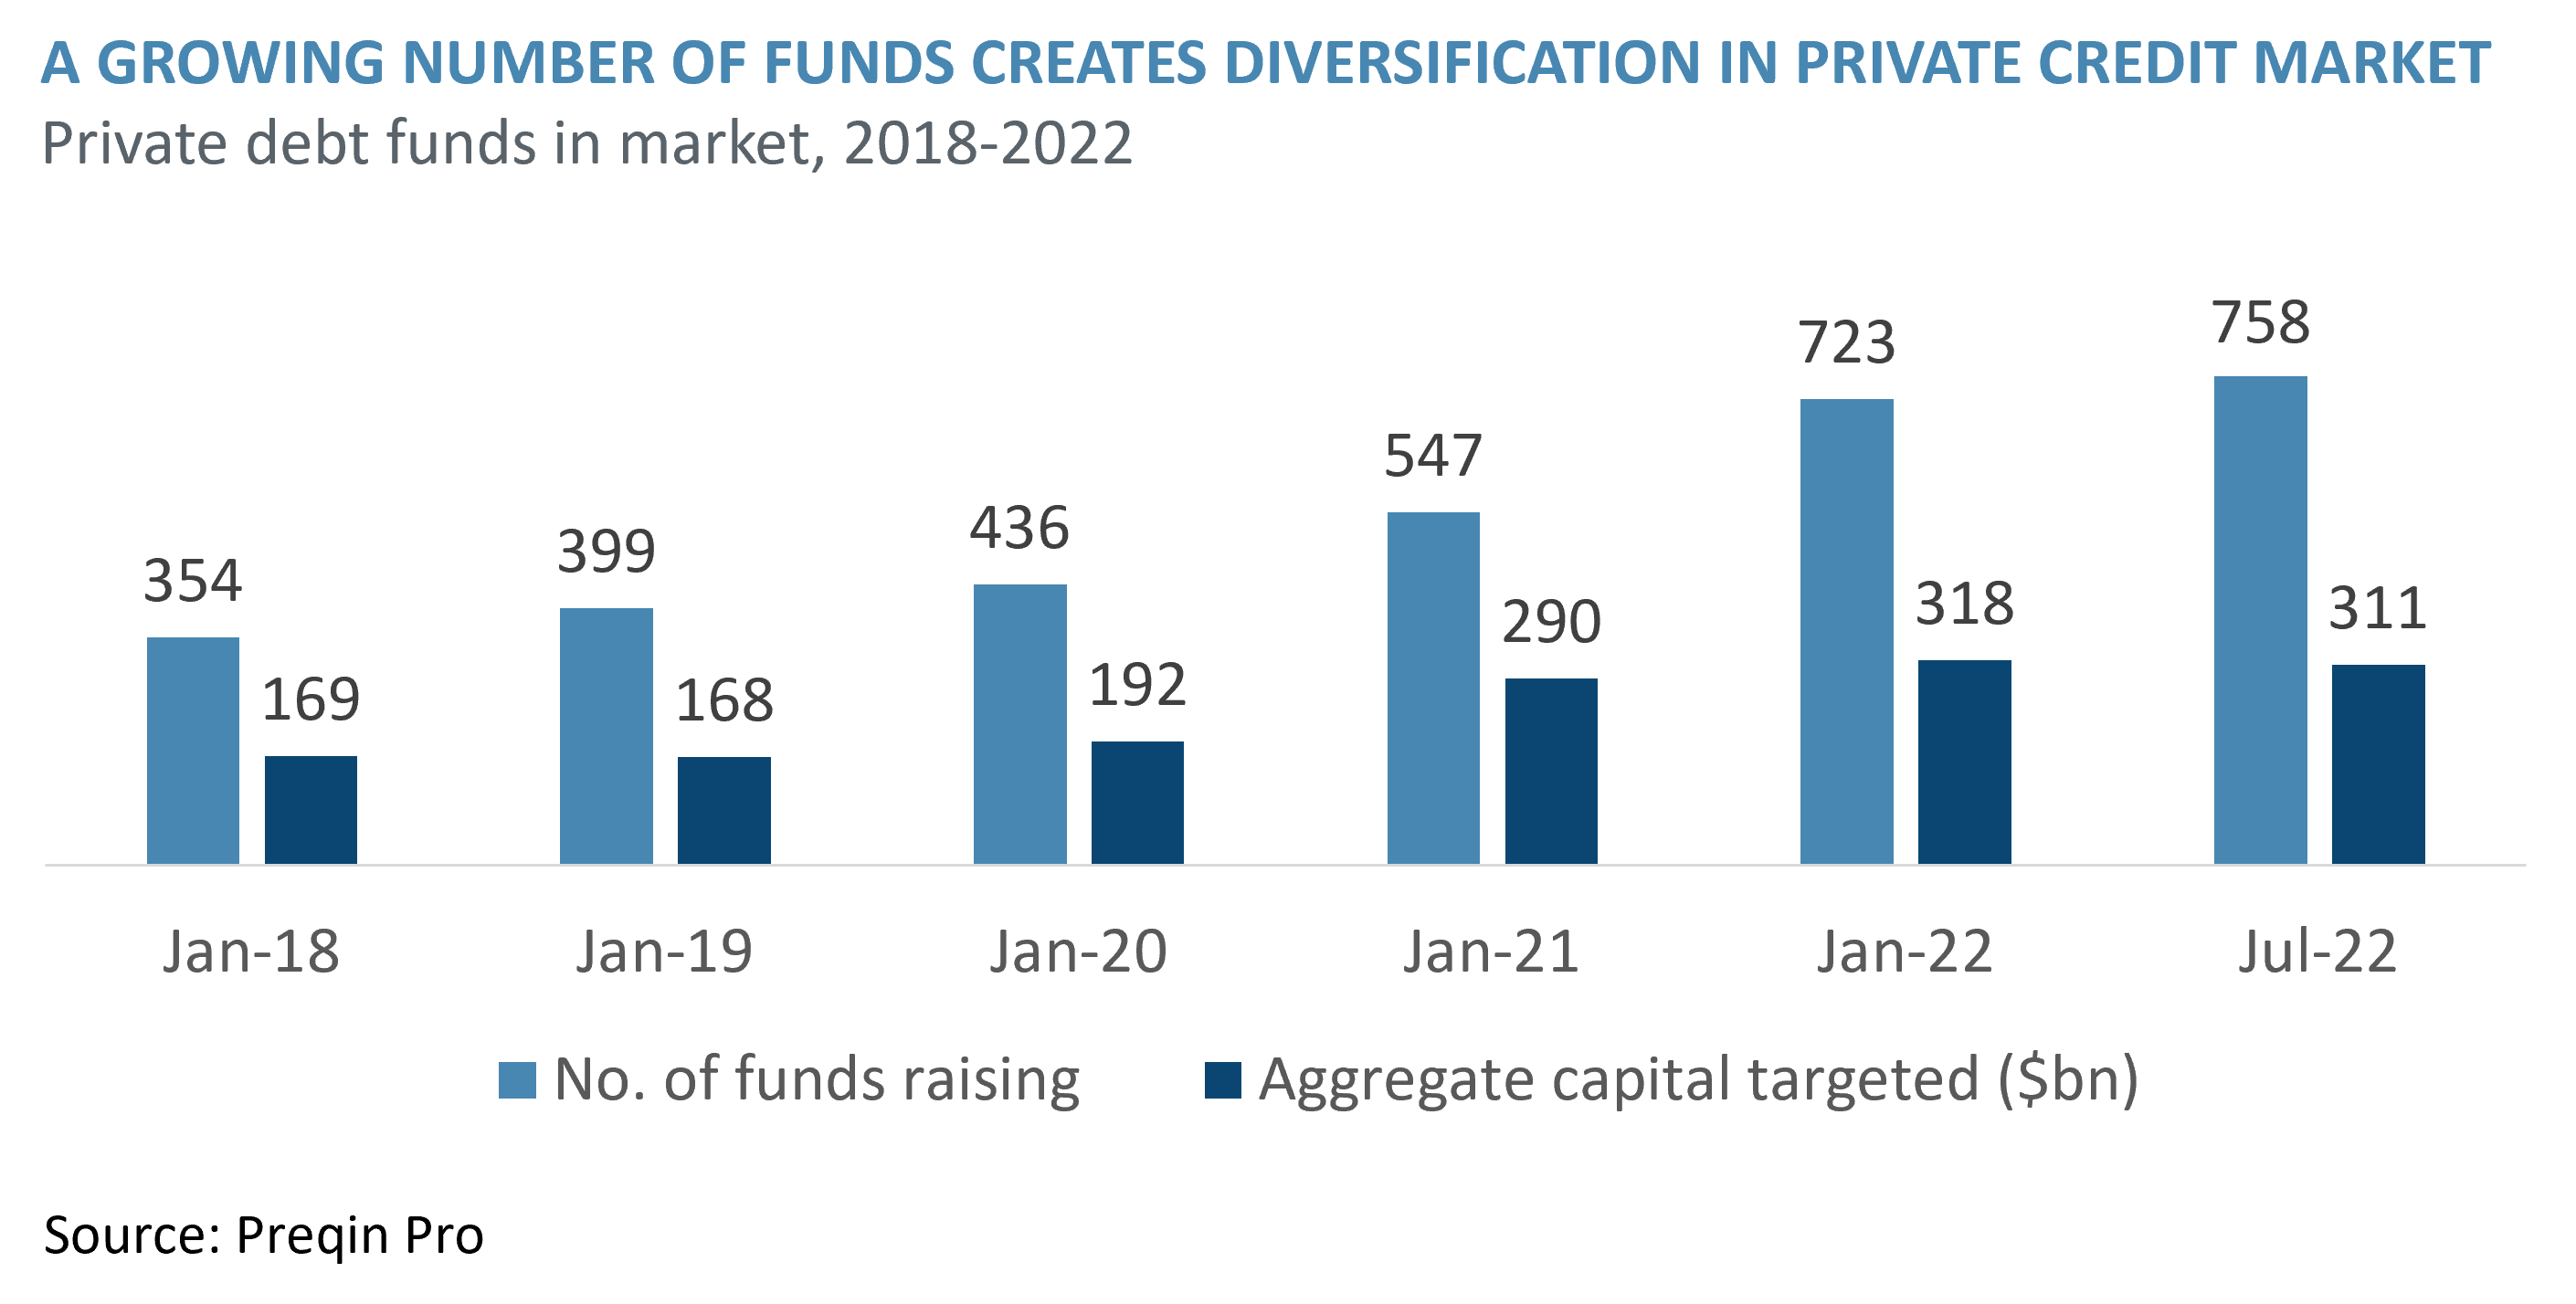 A growing number of funds creates diversification in the private credit market